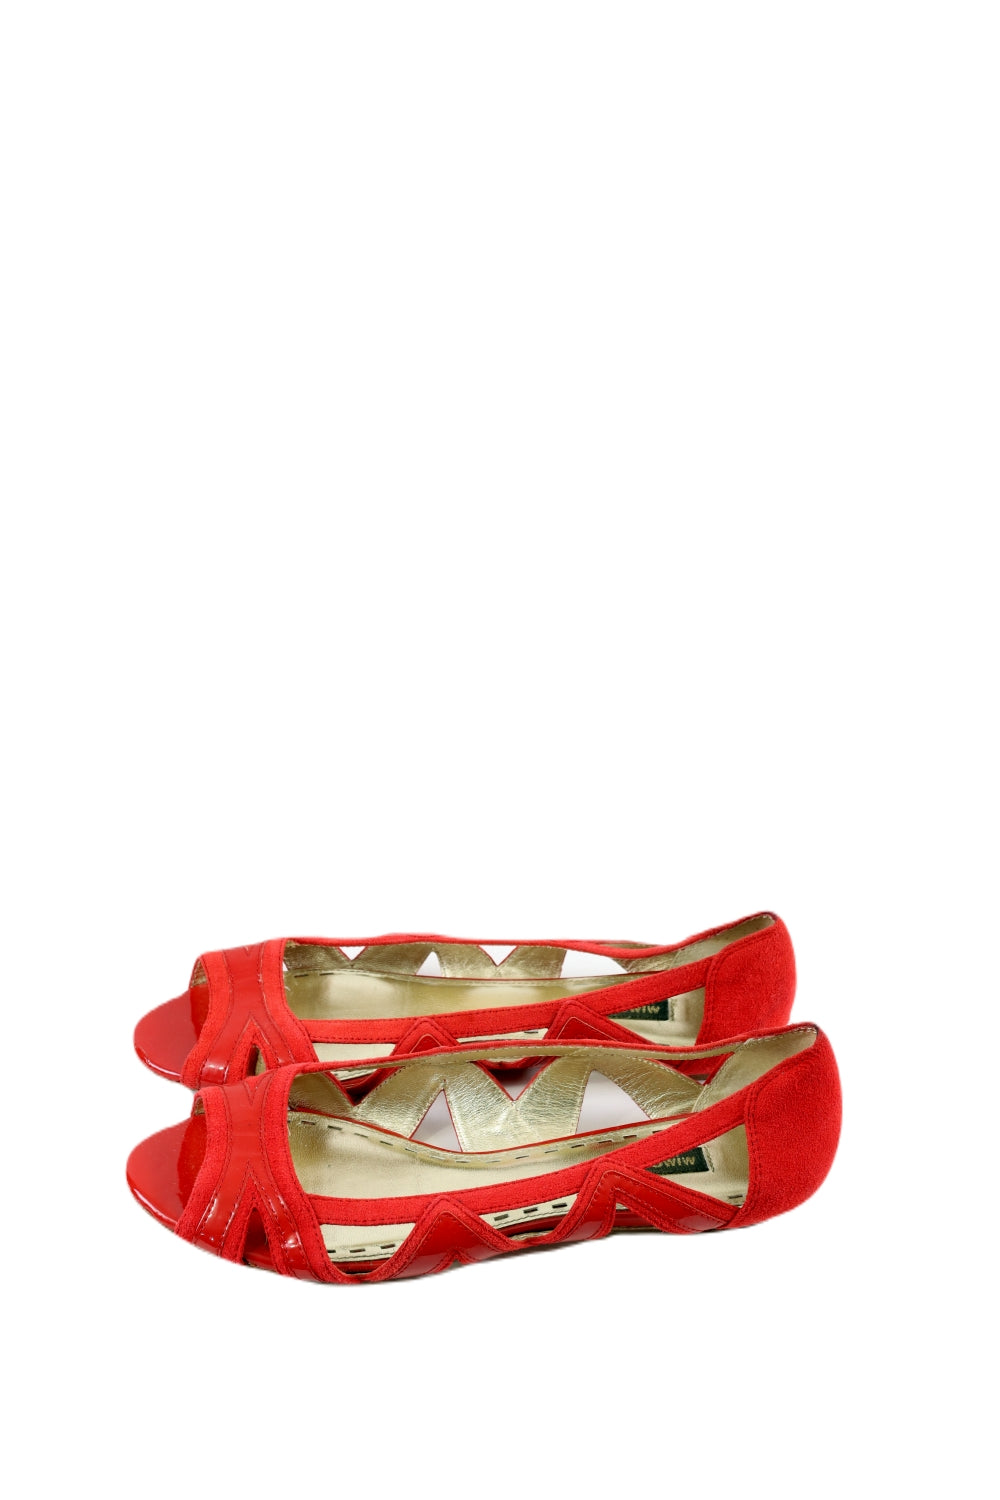 Mimco Red Flats 37